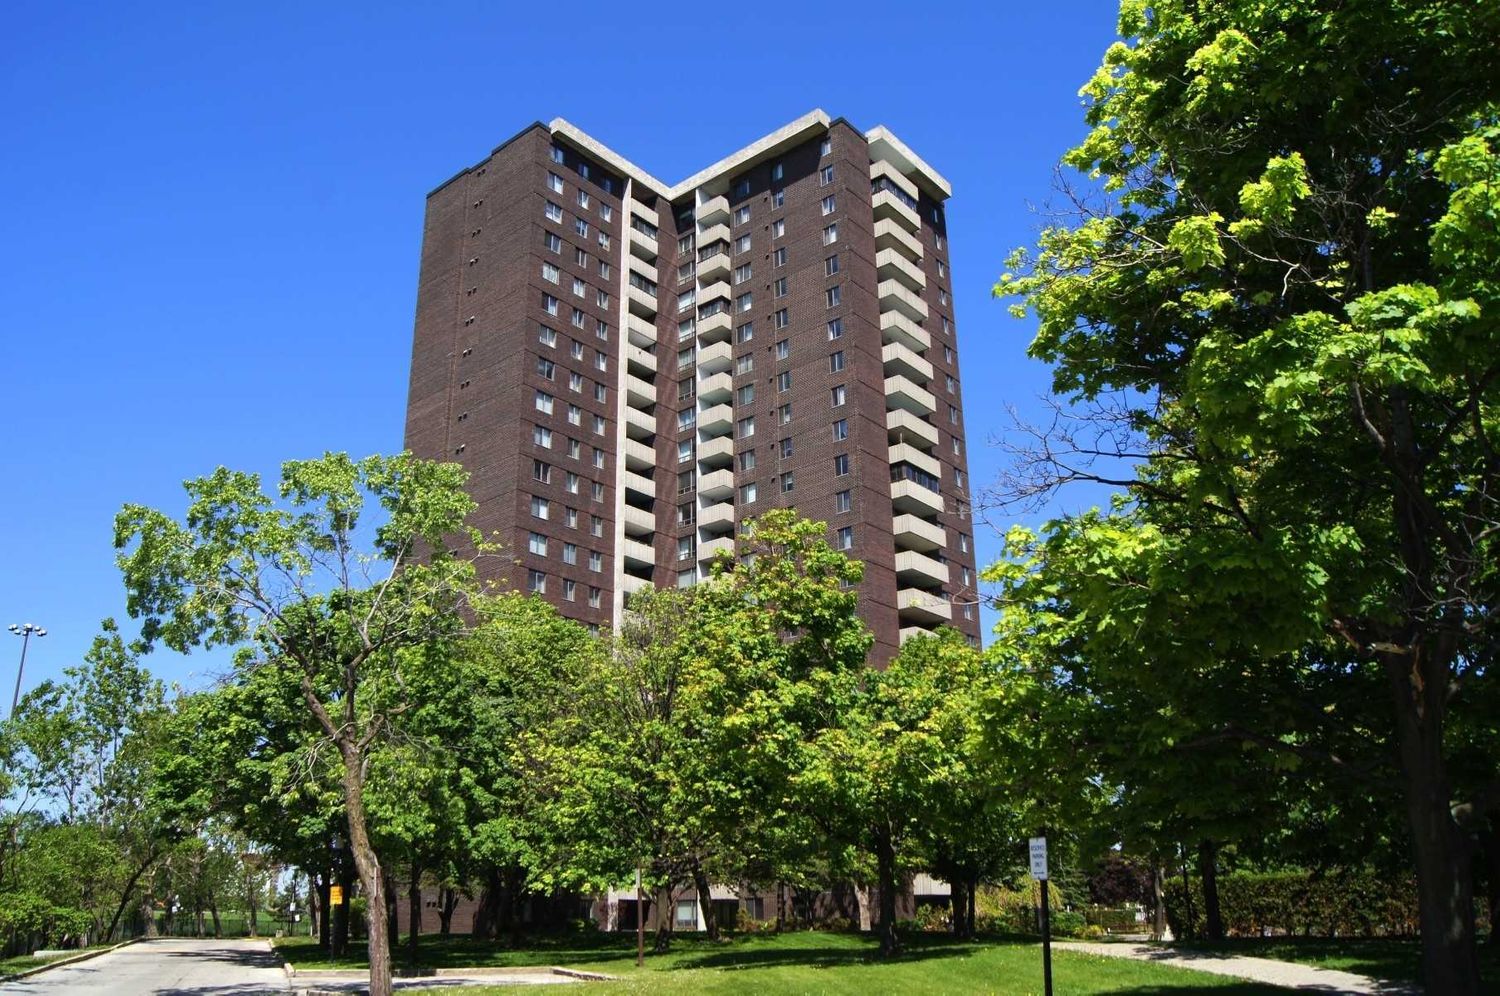 10 Muirhead Road. Crossroads Condos is located in  North York, Toronto - image #1 of 3